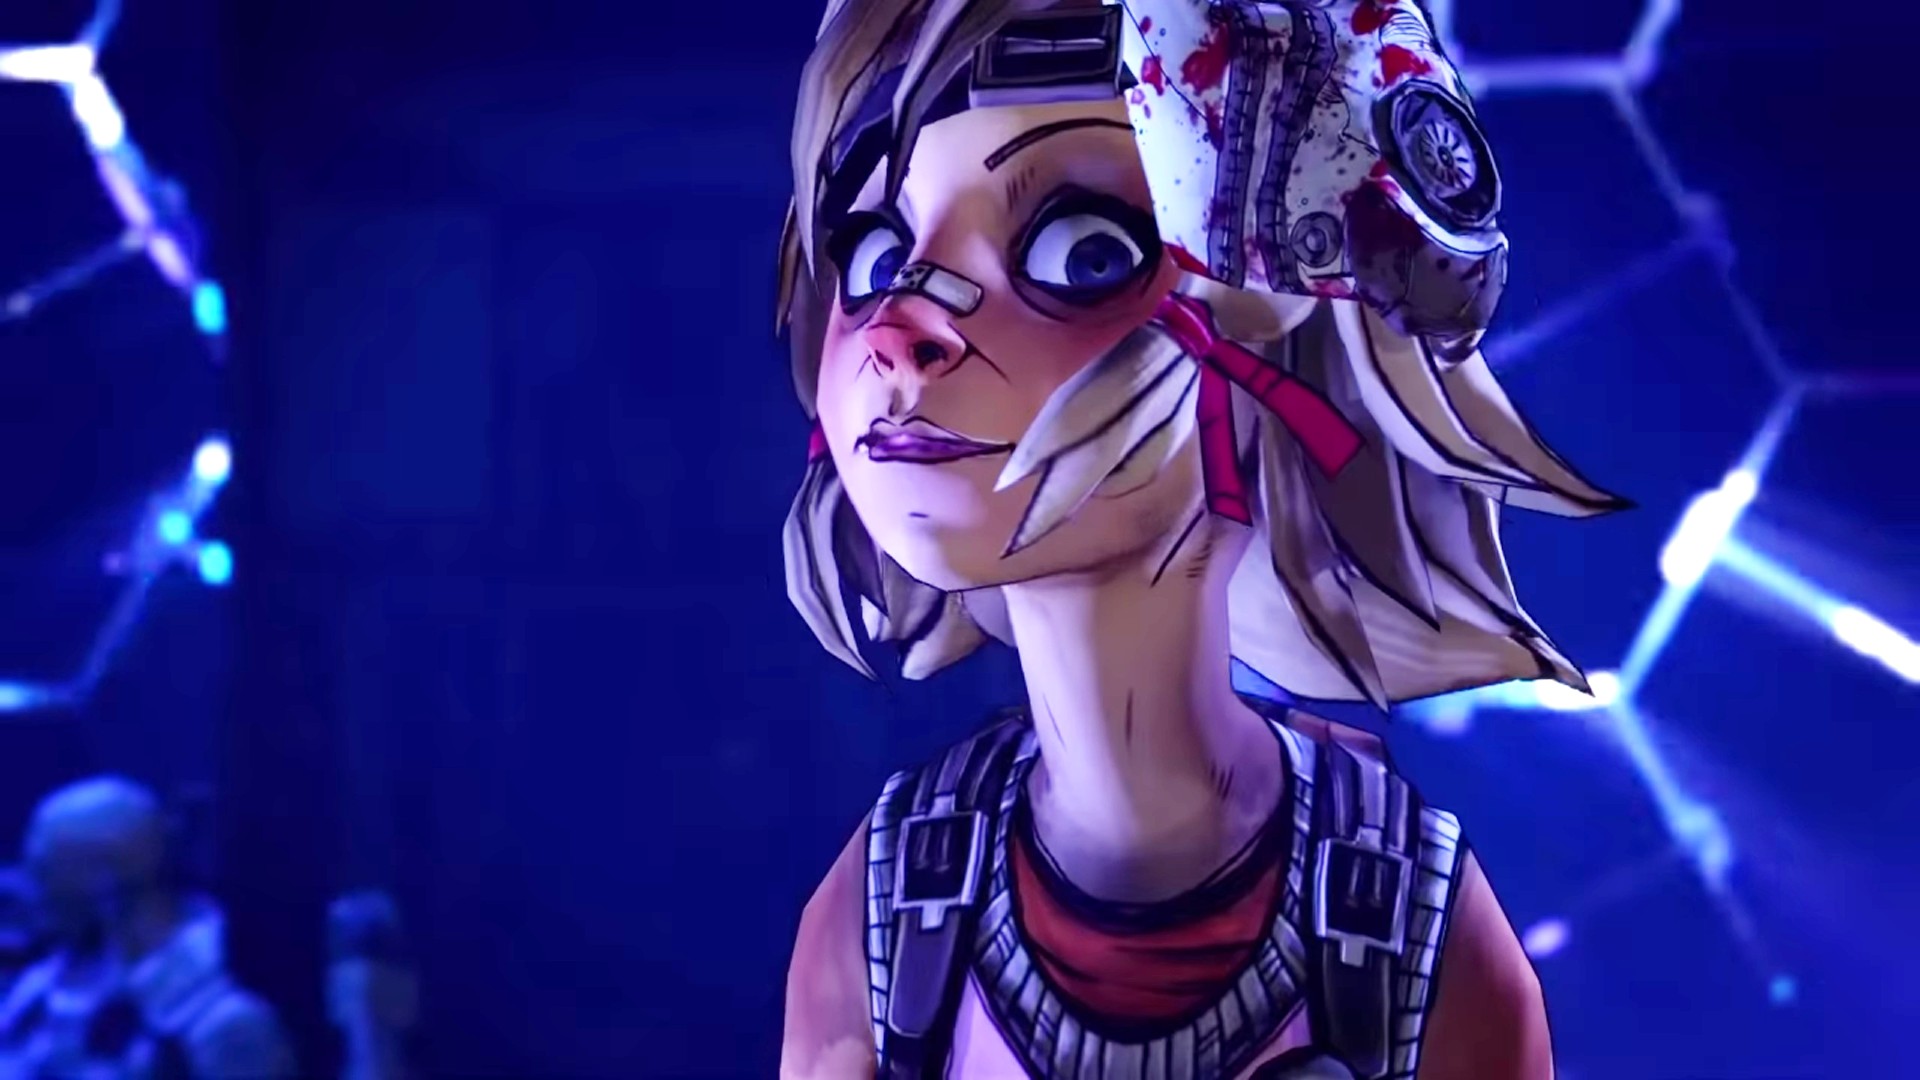 Borderlands Spinoff Starring Tiny Tina to be Announced at E3 – Rumour